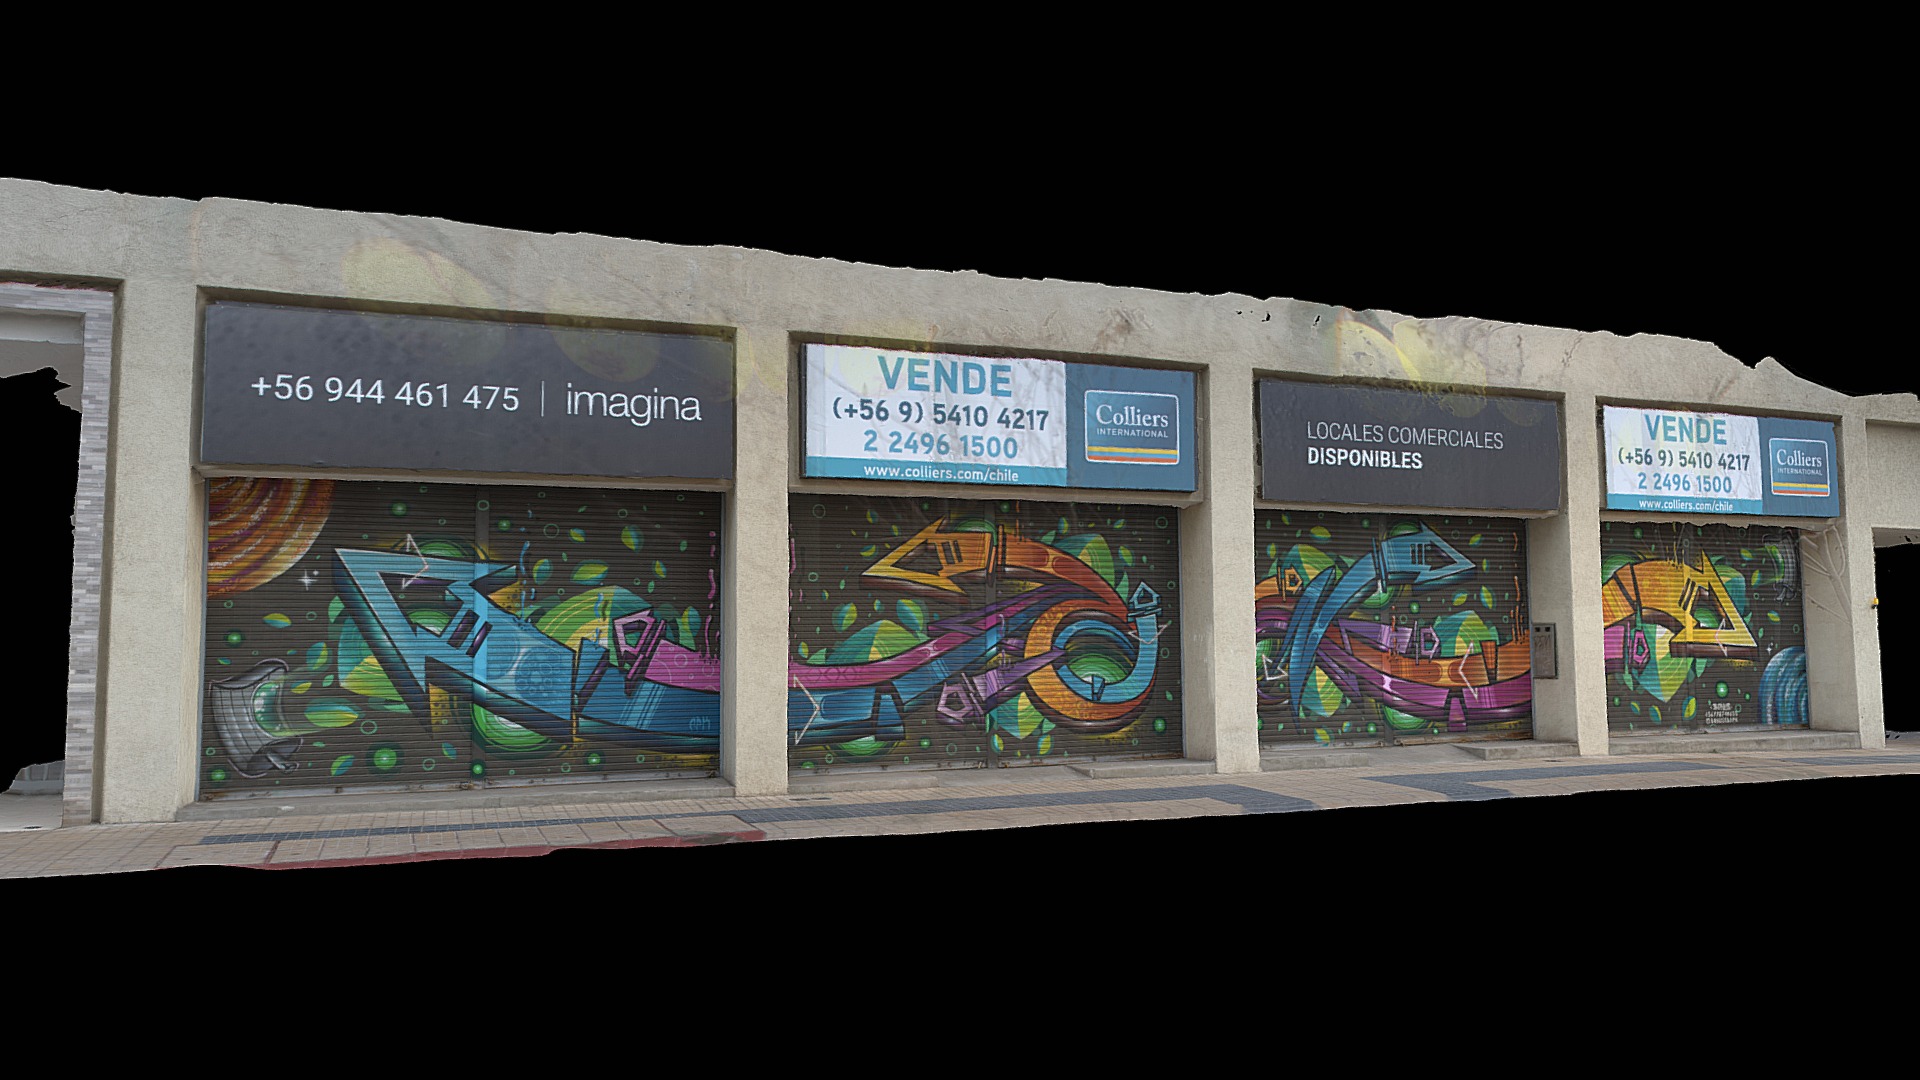 3D model 2018-06 – Santiago – Muro 40 - This is a 3D model of the 2018-06 - Santiago - Muro 40. The 3D model is about graphical user interface.